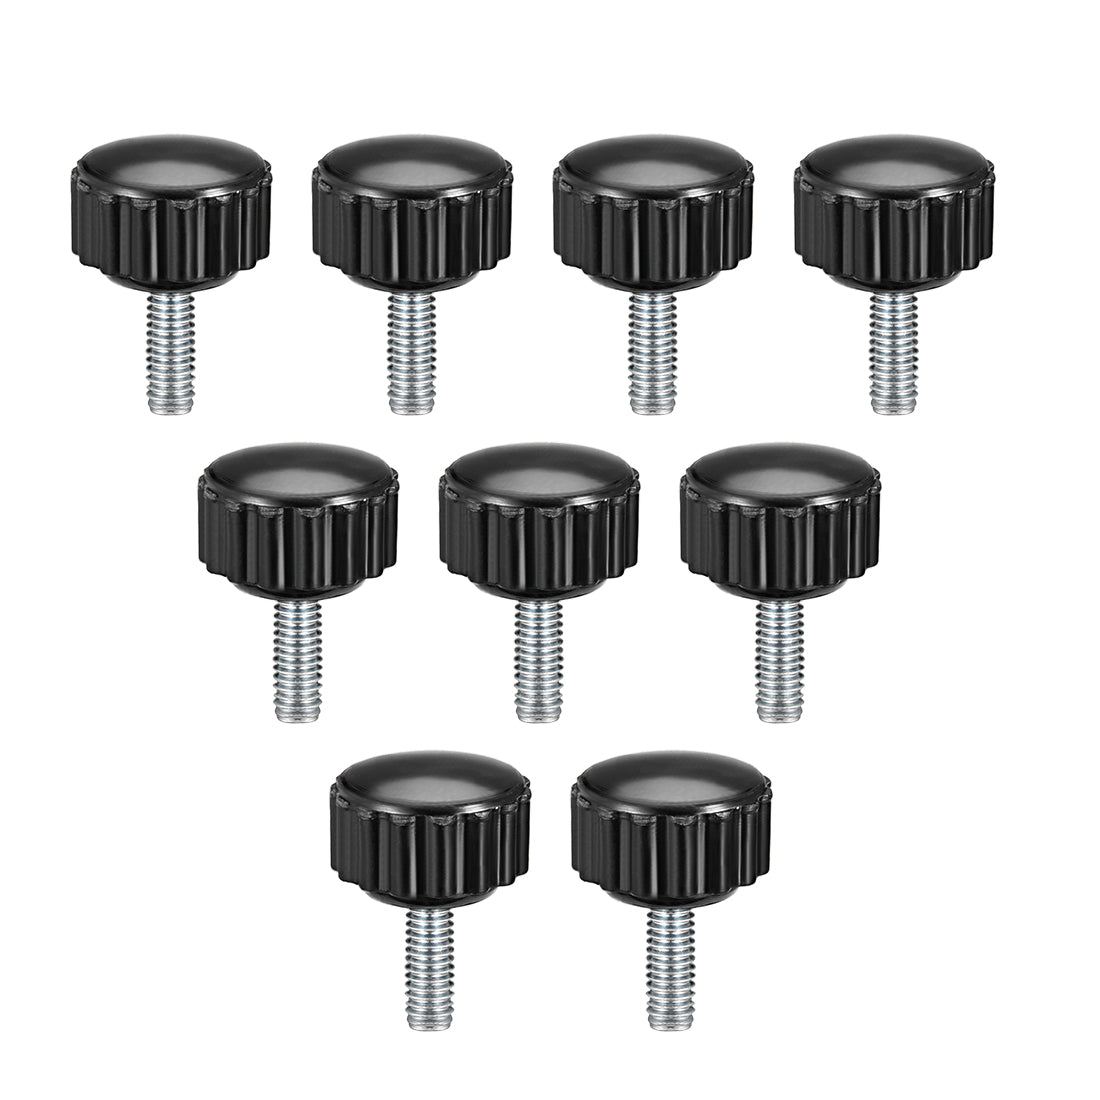 Uxcell Uxcell M4 x 14mm Male Thread Knurled Clamping Knobs Grip Thumb Screw on Type  9 Pcs